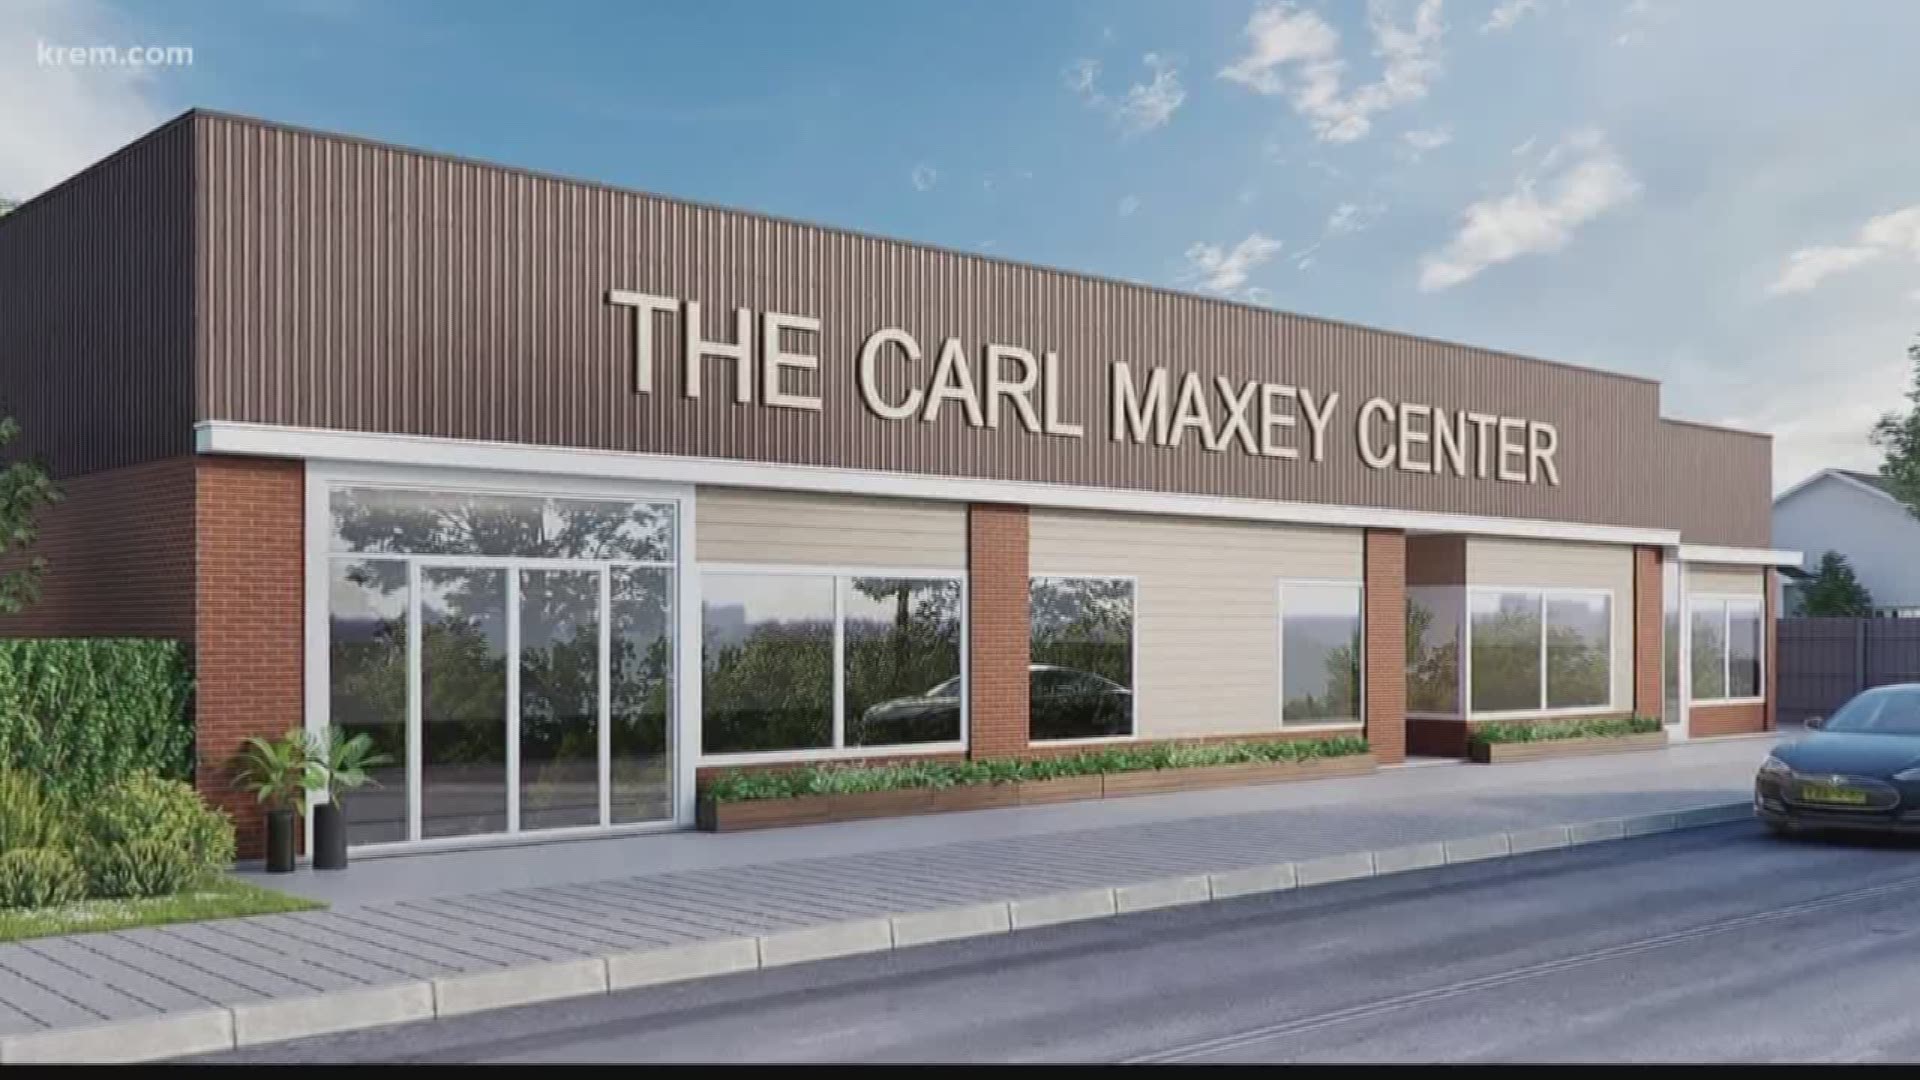 The Carl Maxey Center, named after the well-known civil rights activist and Spokane native, will be a hub for the African-American community.